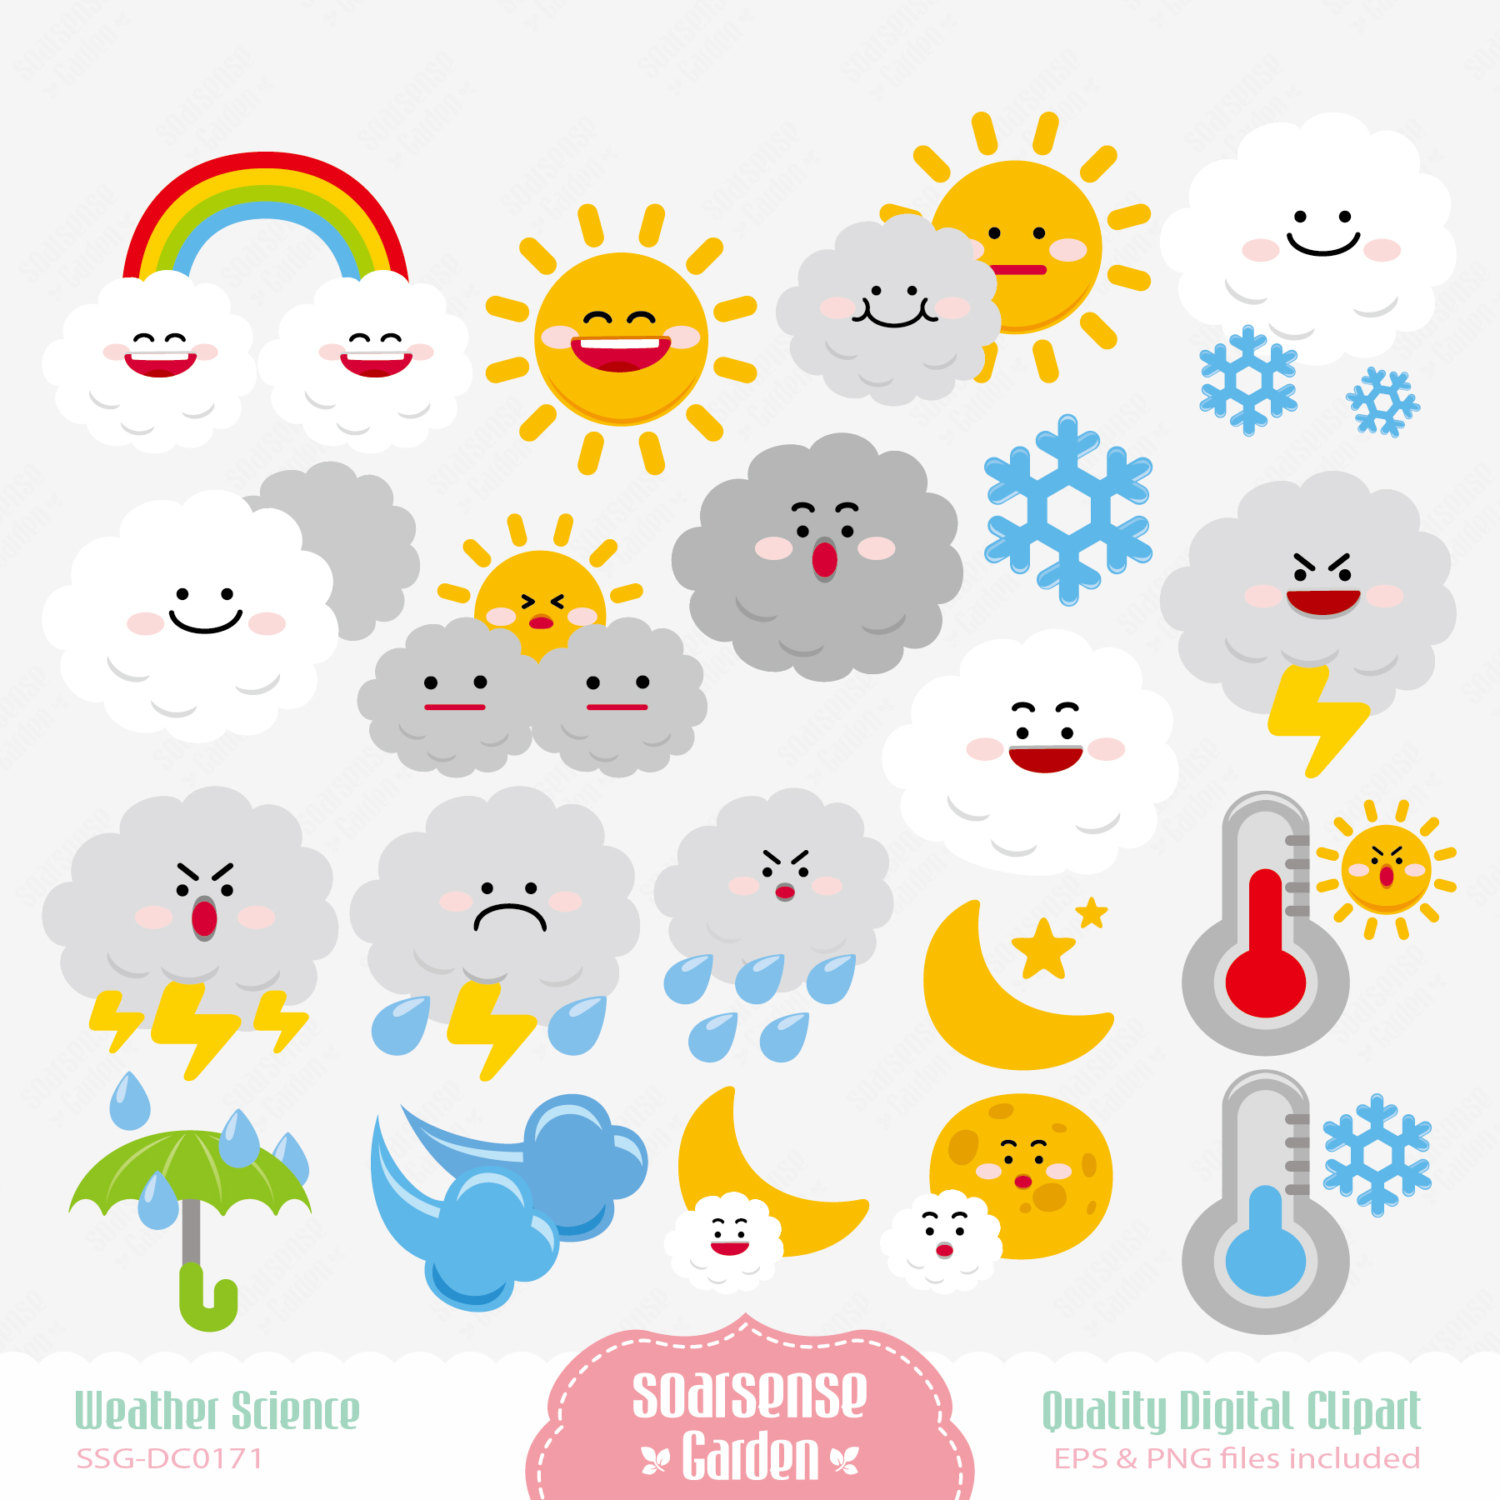 Weather Science Digital Clipart March 08 2014 At 10 53pm